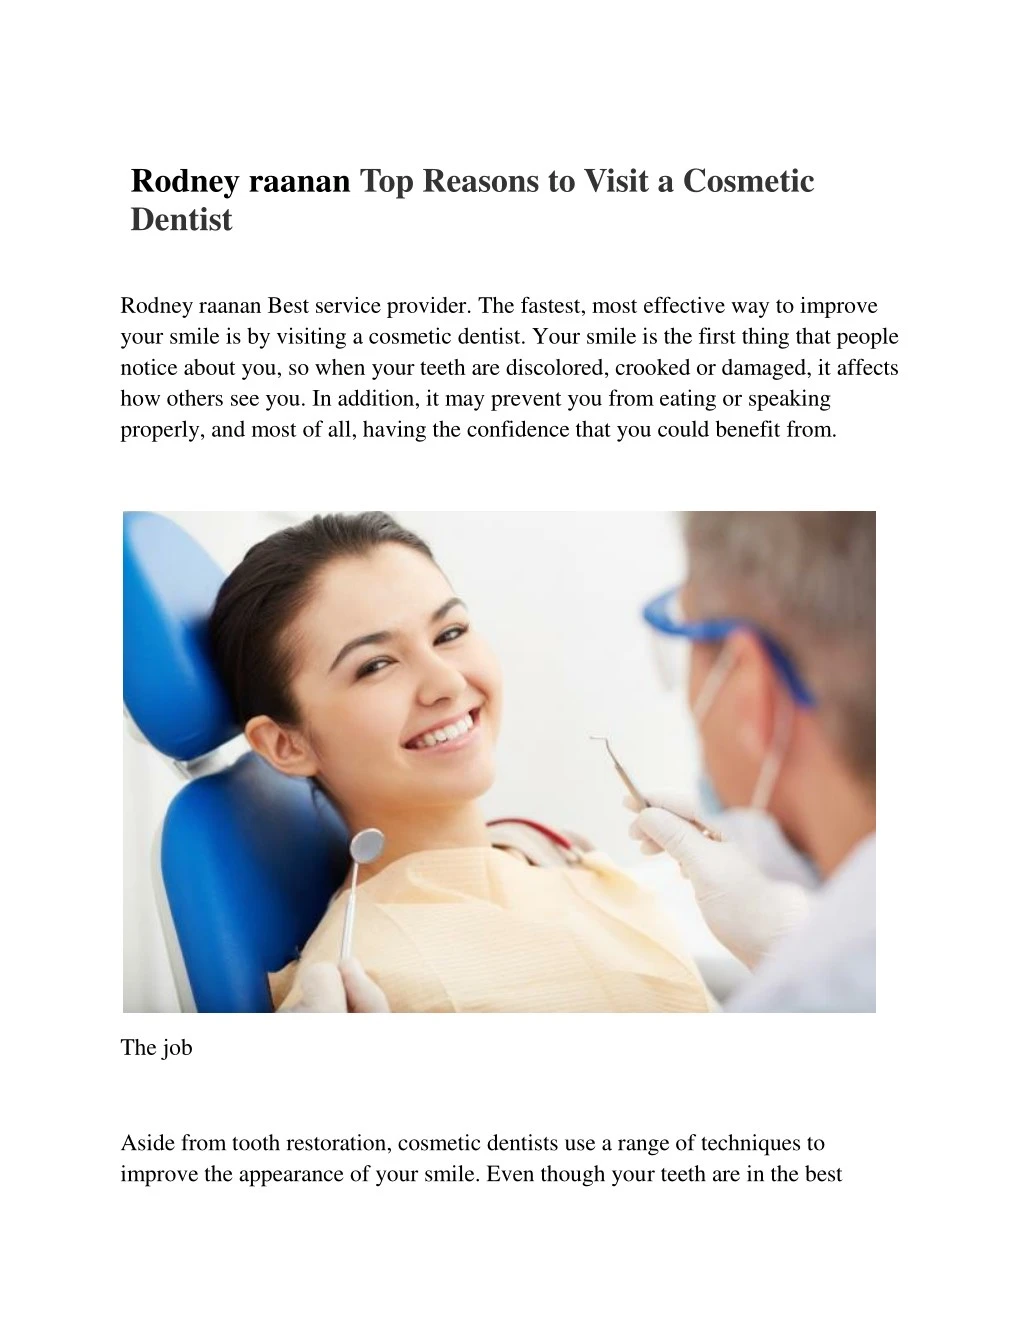 rodney raanan top reasons to visit a cosmetic